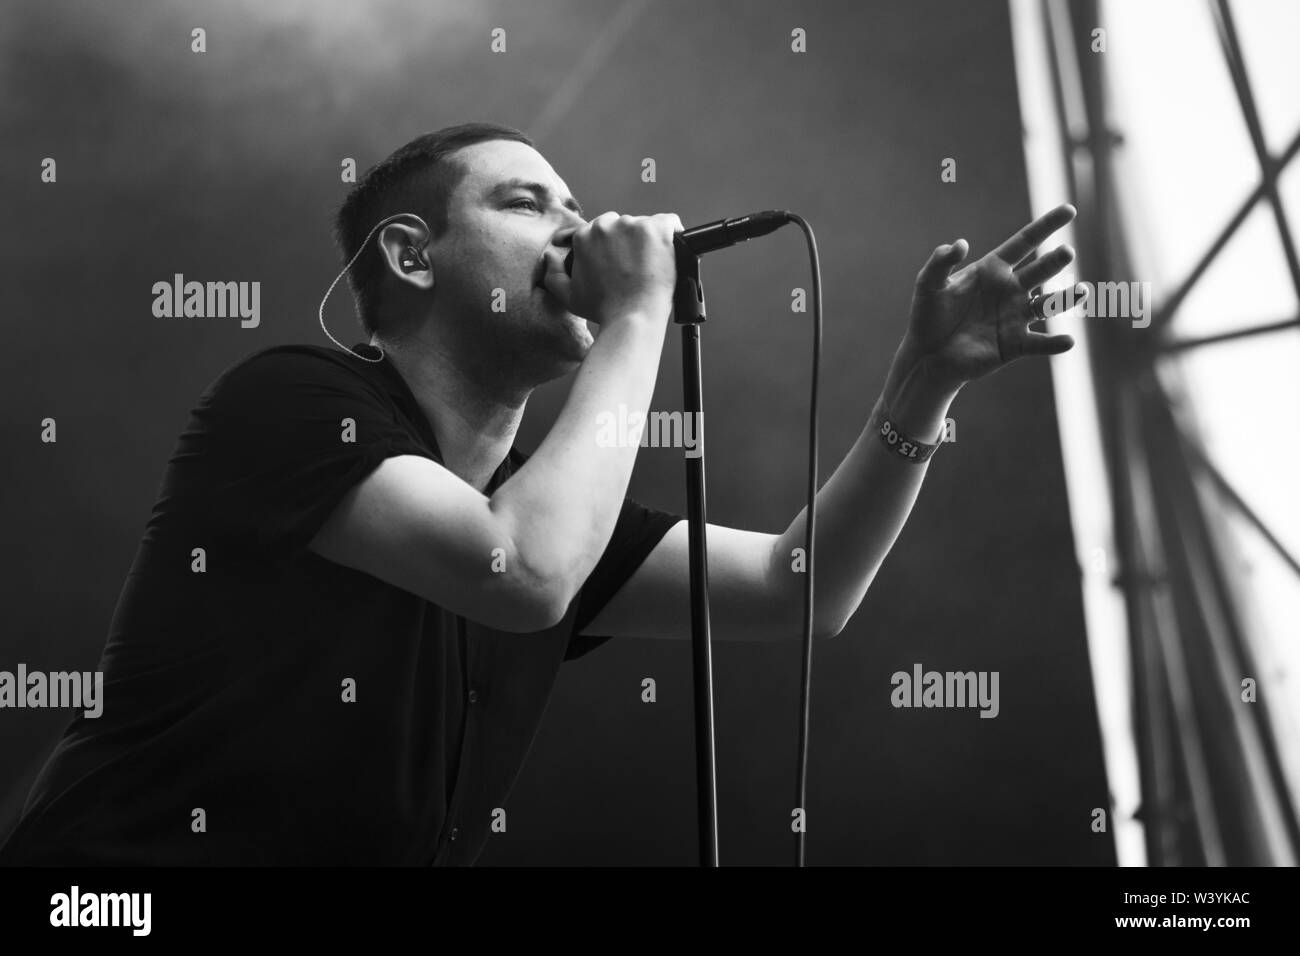 Bergen, Norway - June 15th, 2019. The Scottish post-punk band The Twilight Sad performs a live concert during the Norwegian music festival Bergenfest 2019 in Bergen. Here vocalist James Graham is seen live on stage. (Photo credit: Gonzales Photo - Jarle H. Moe). Stock Photo